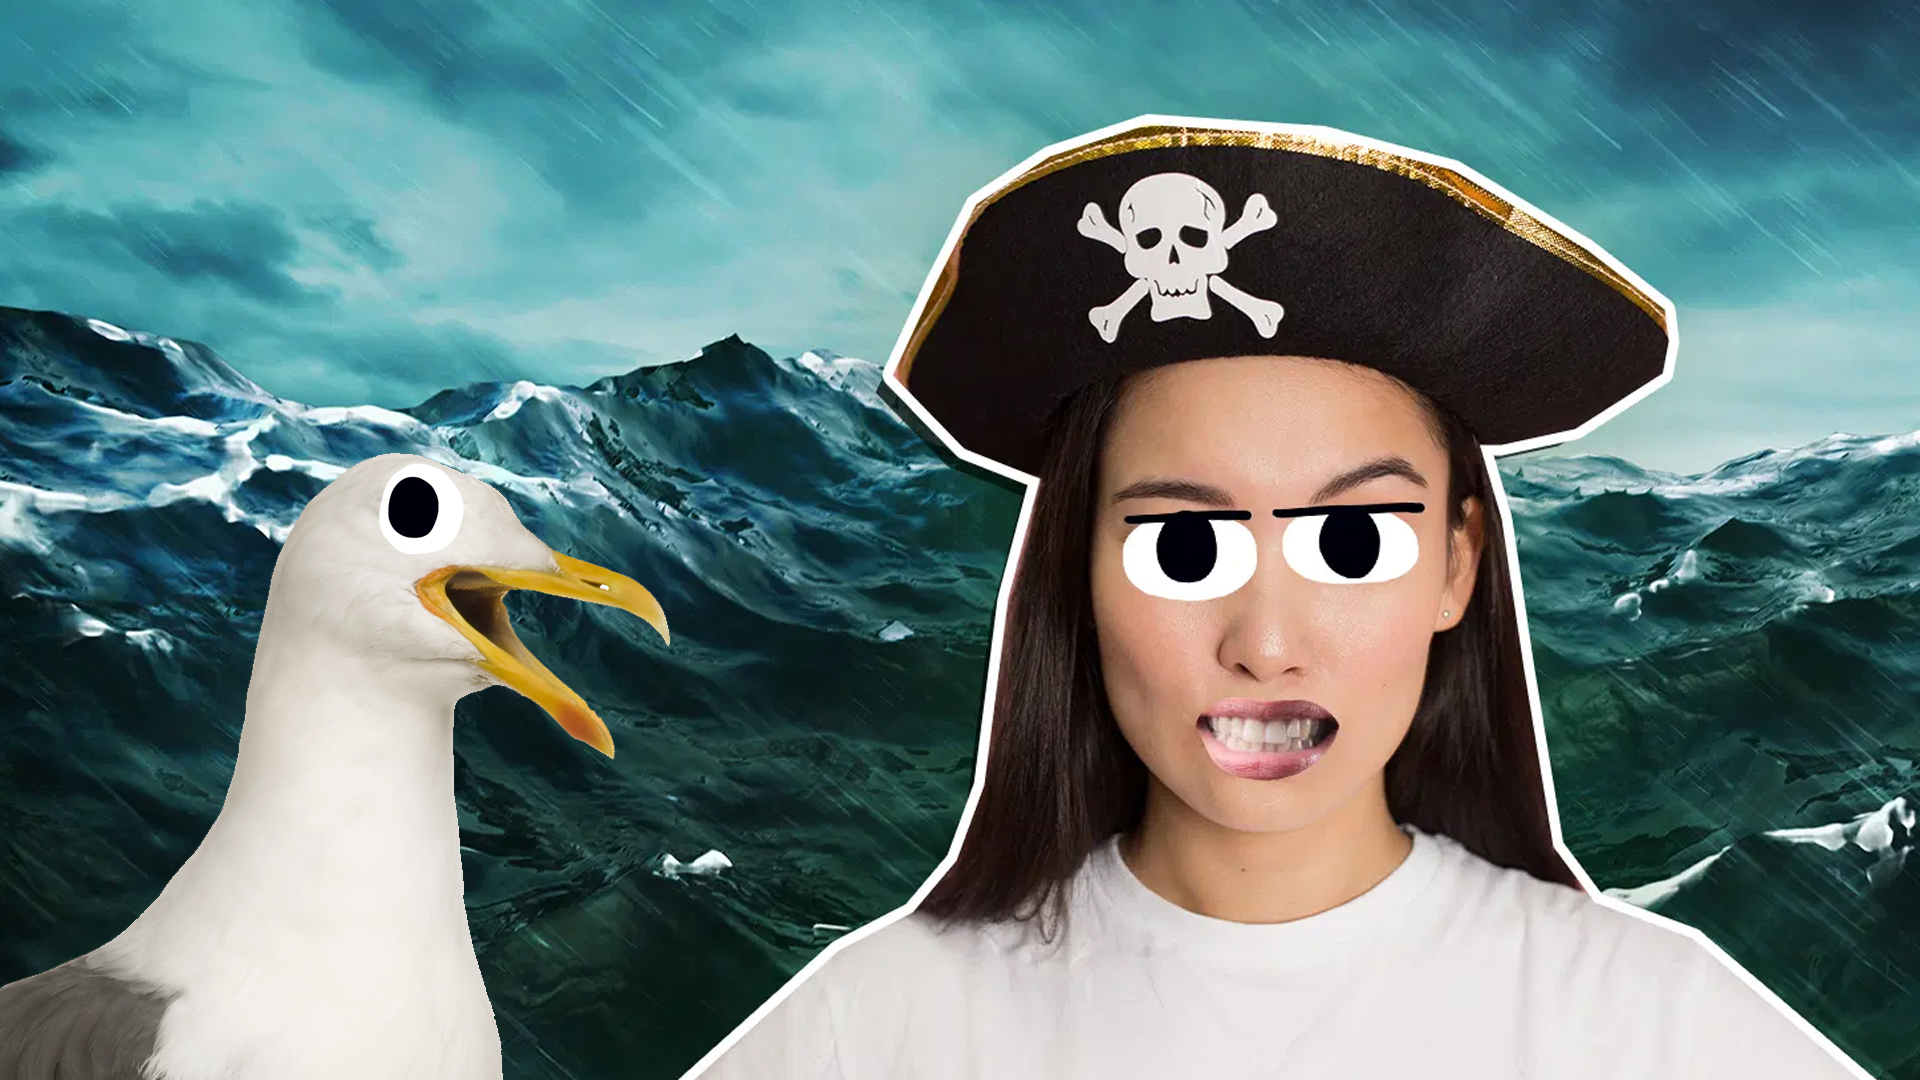 A pirate and a seagull on a stormy sea